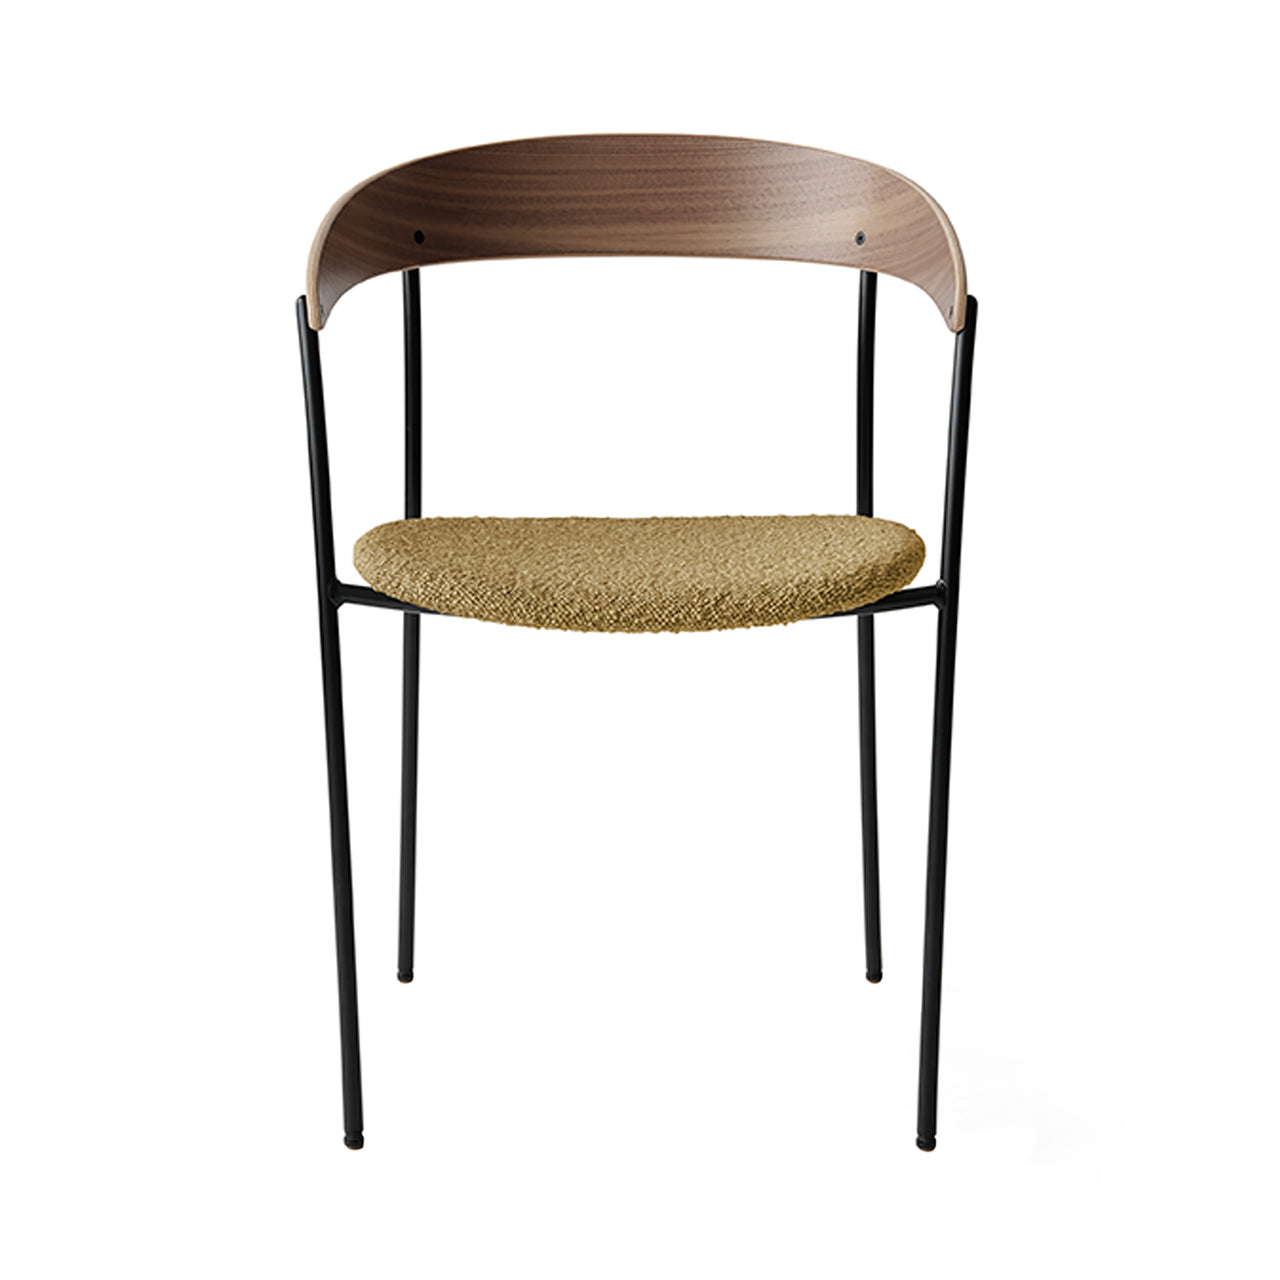 Missing Chair: Upholstered + Lacquered Walnut + With Arm